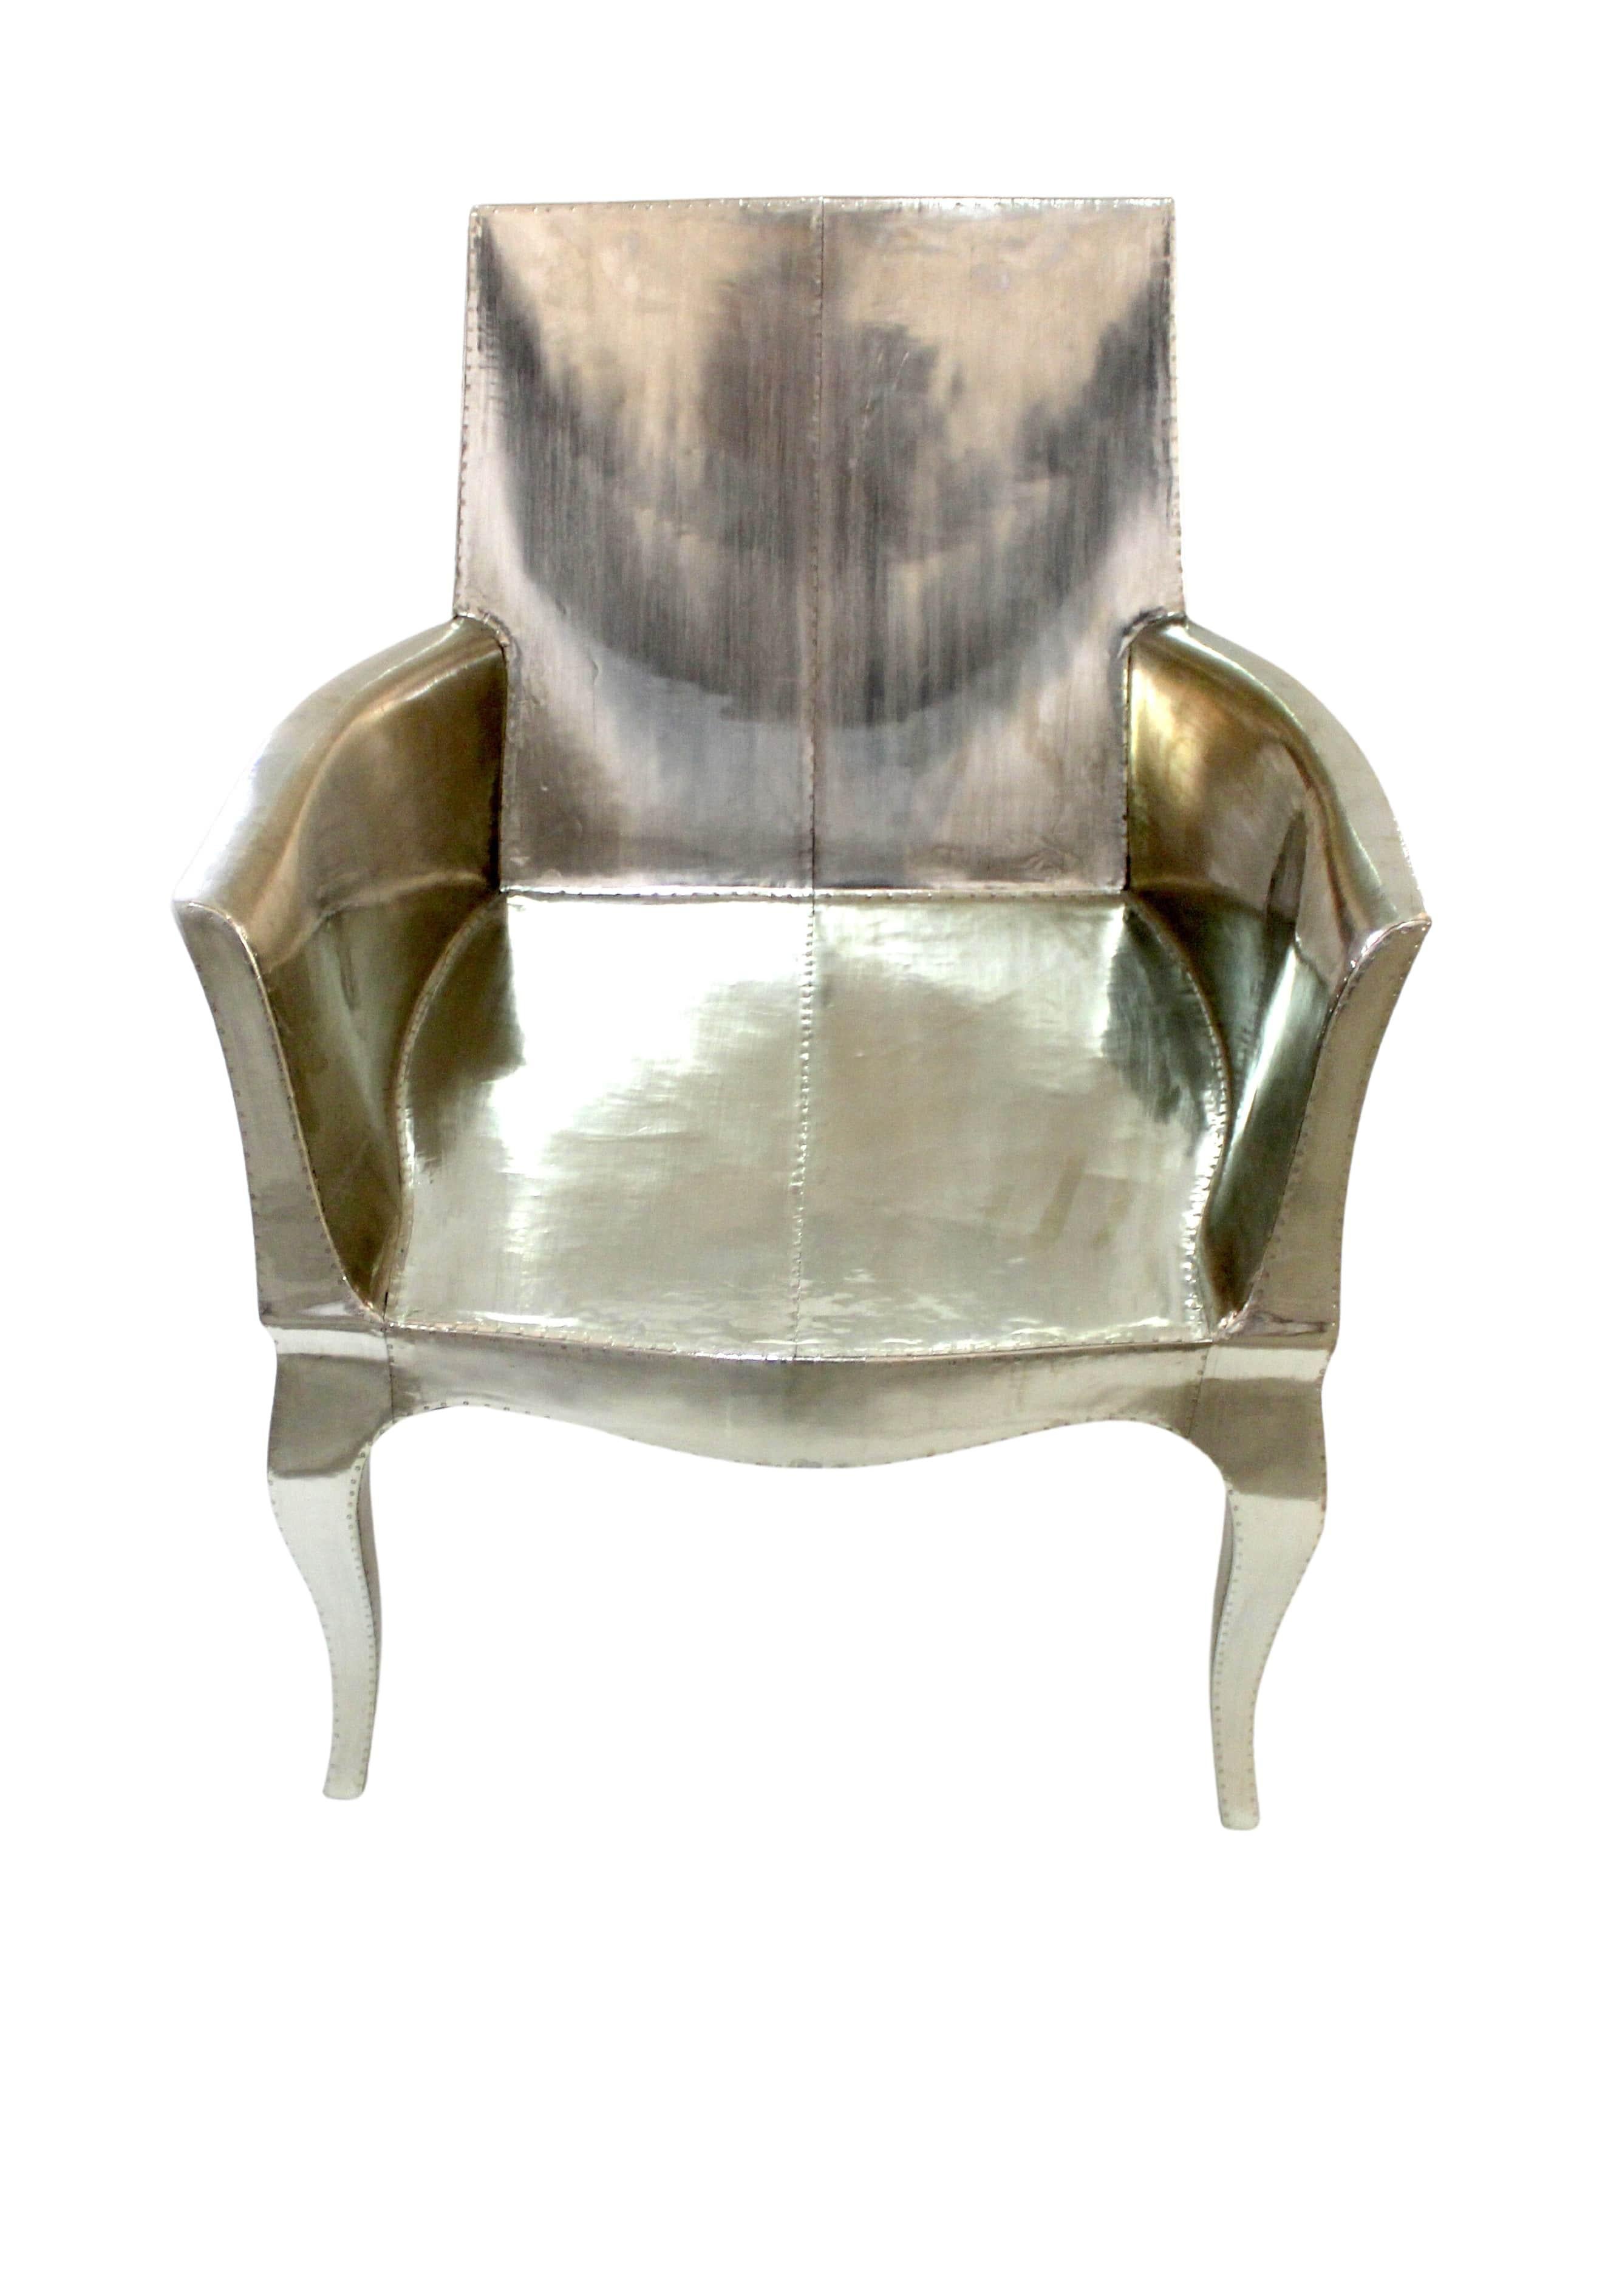 Bronzed Art Deco Style Chairs Pair Designed by Paul Mathieu for Stephanie Odegard For Sale